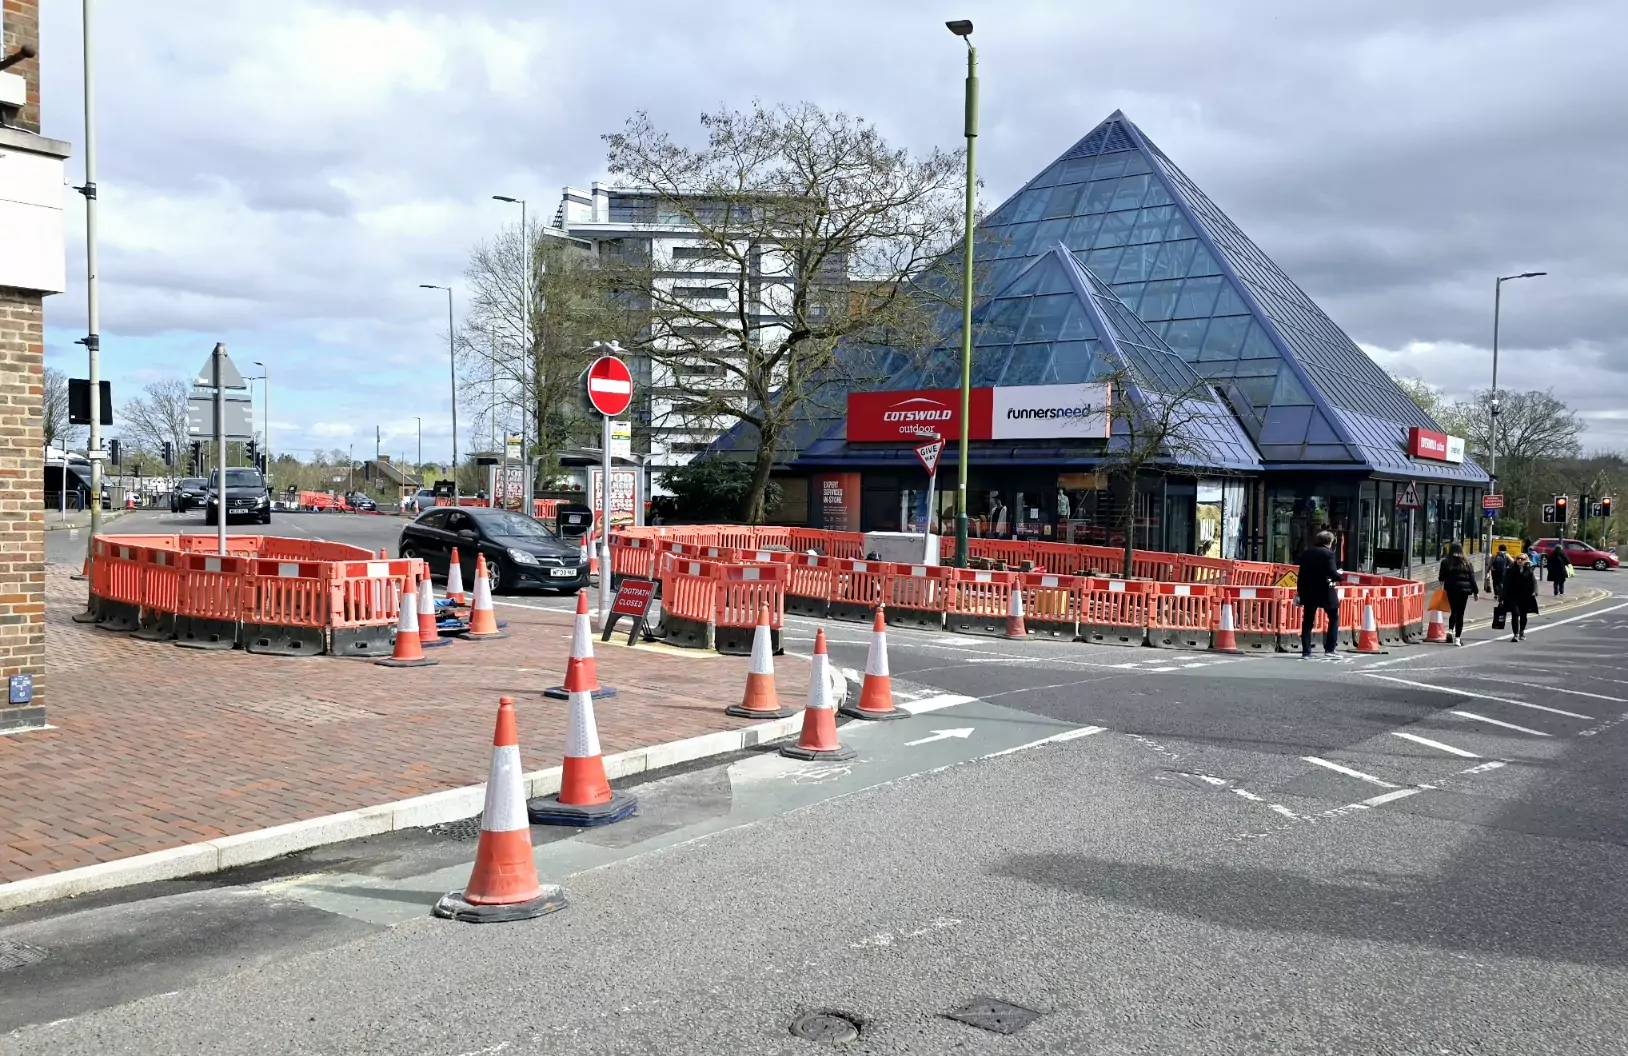 Watford Highstreet and Water Lane Route closures for safety works lasting until mid-April